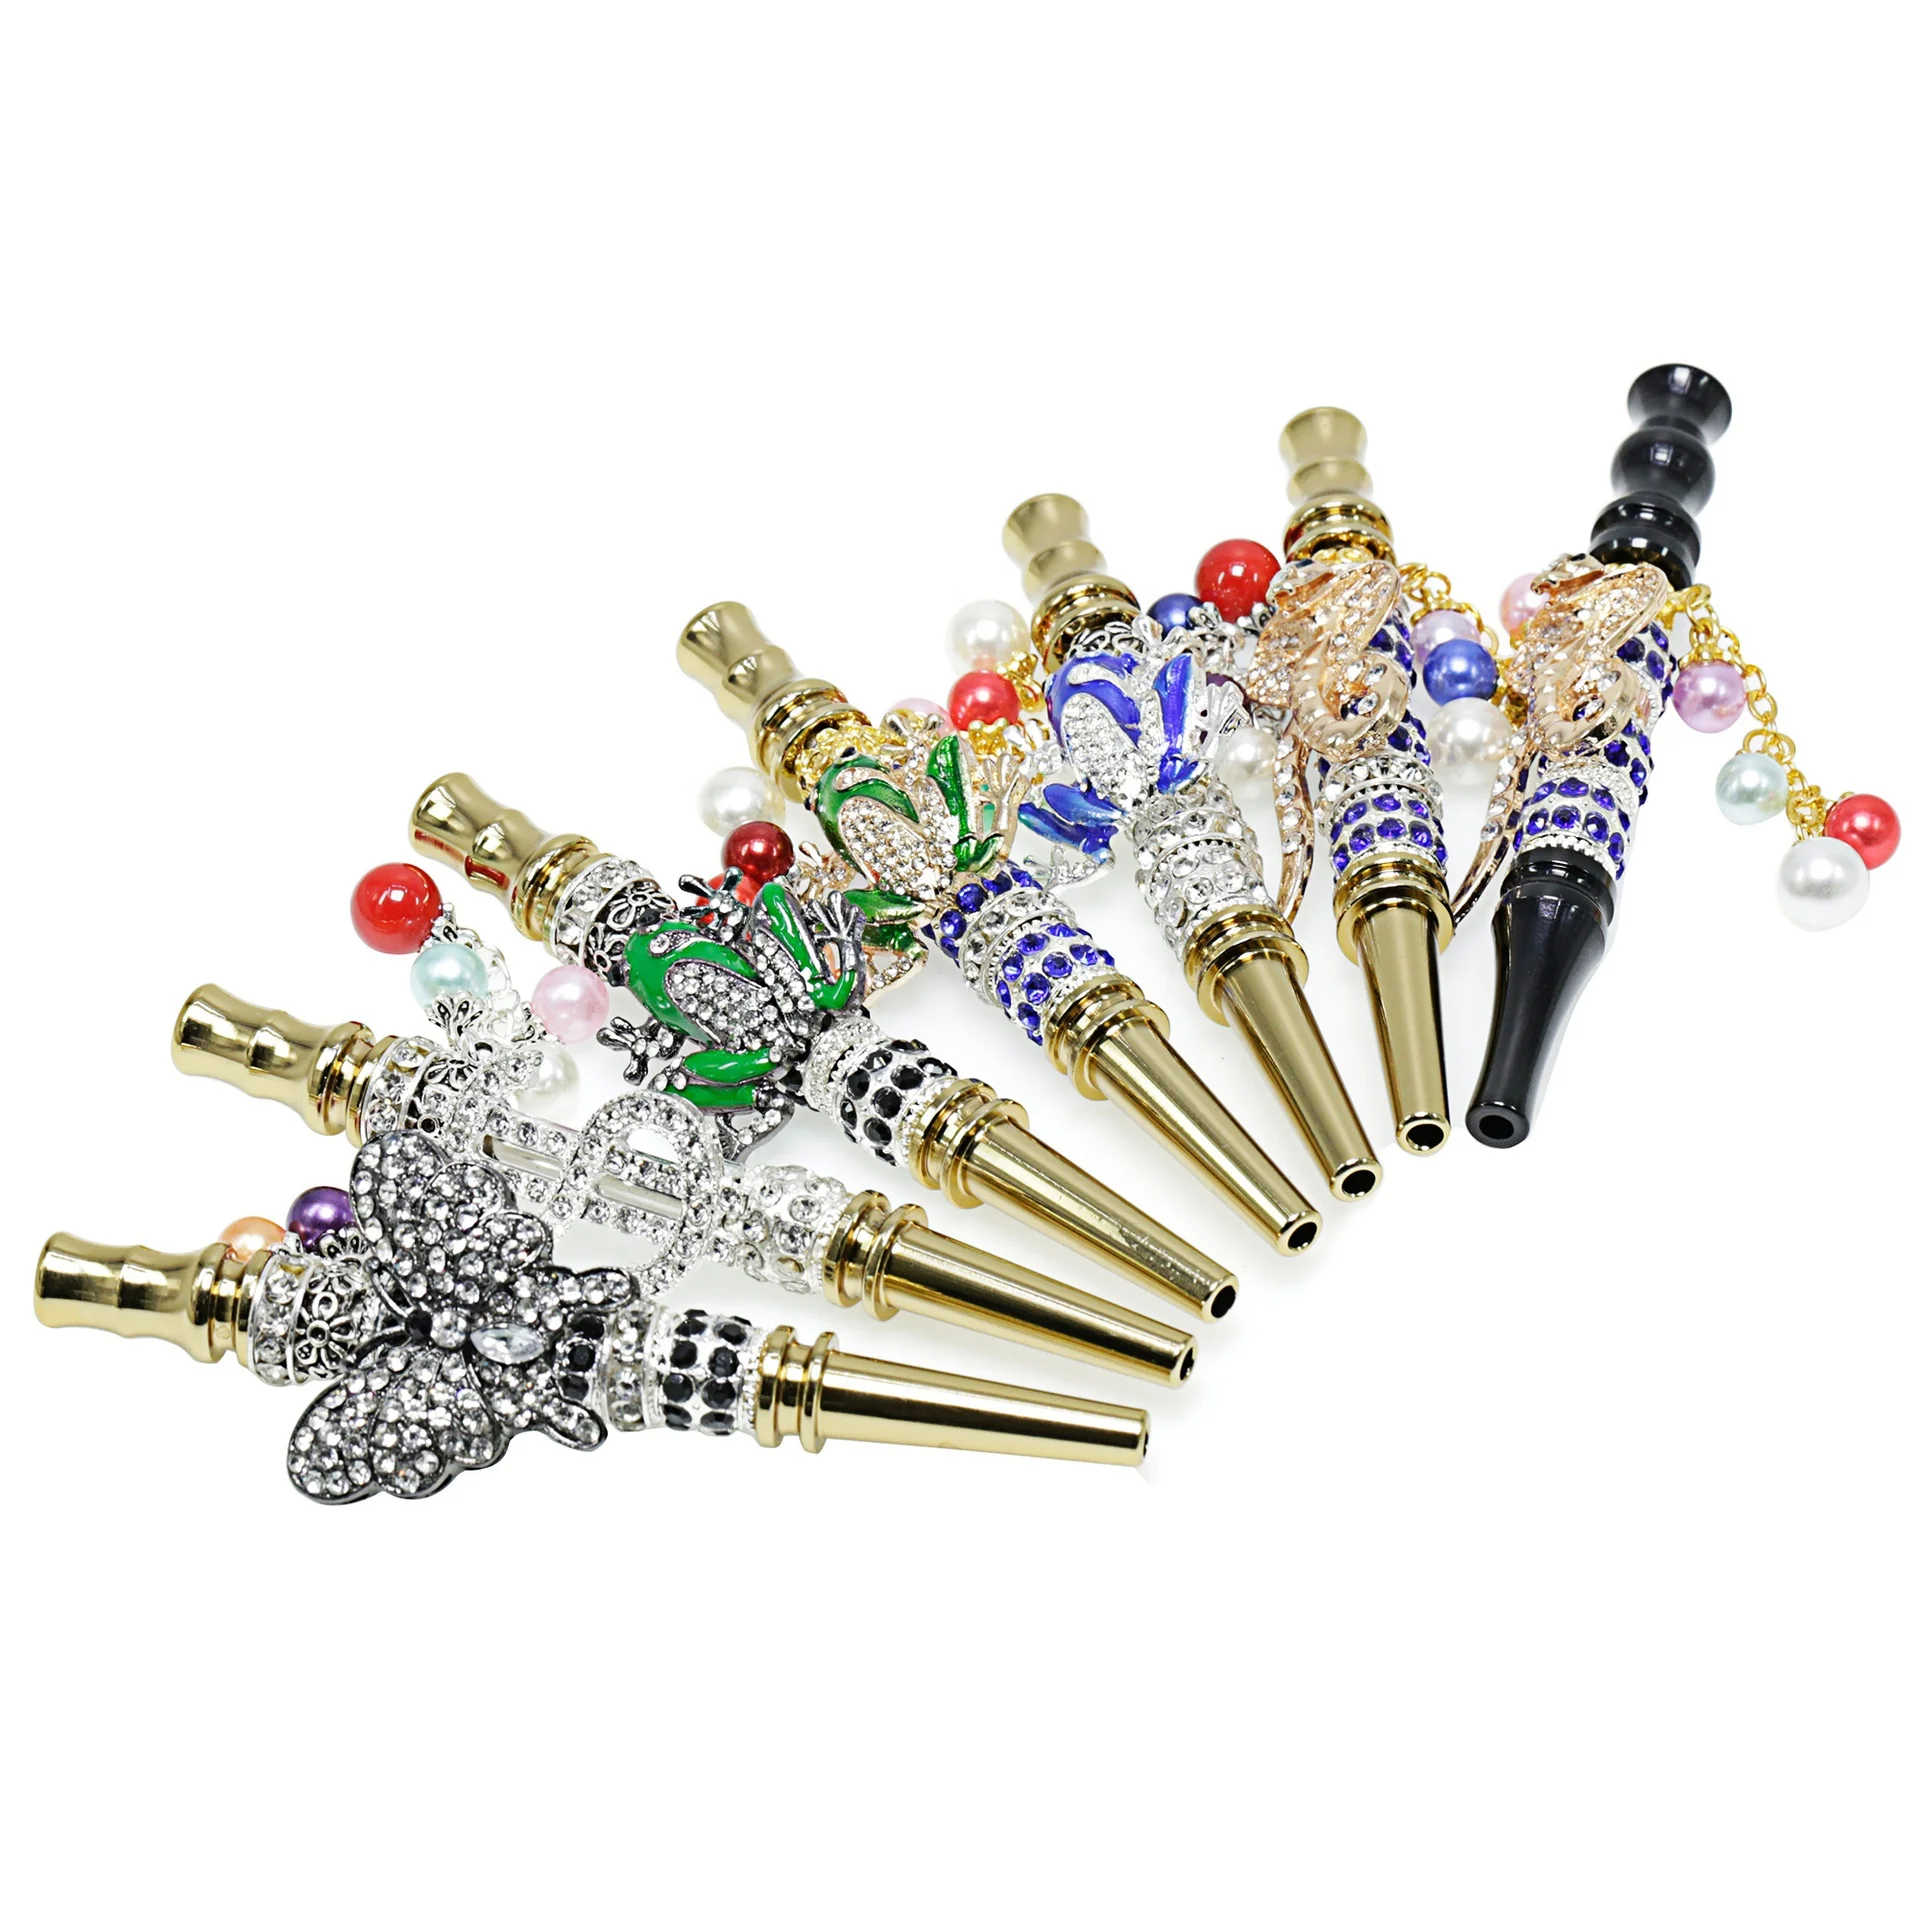 

2021 trends free type everyday frosted shisha pen 500 puffs disposable metal hookah mouthpiece tips for wholesales, 18 different styles